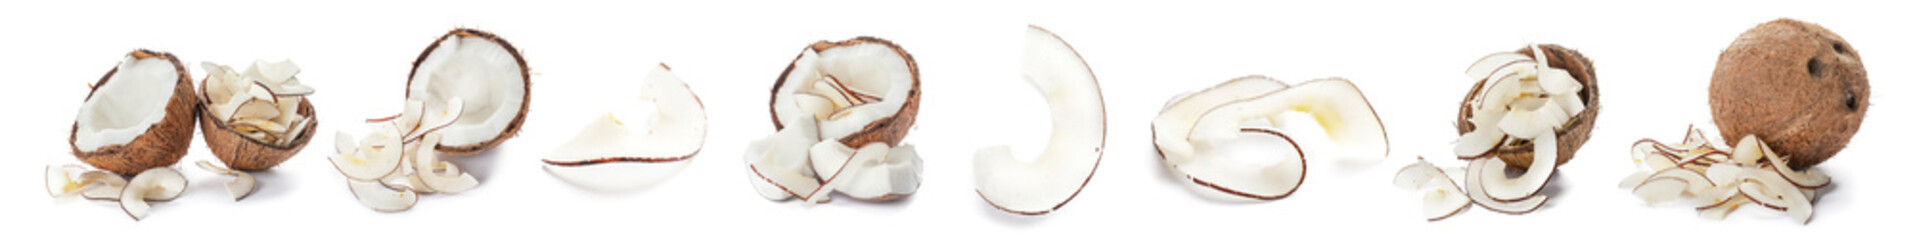 Collage of ripe coconuts with chips on white background